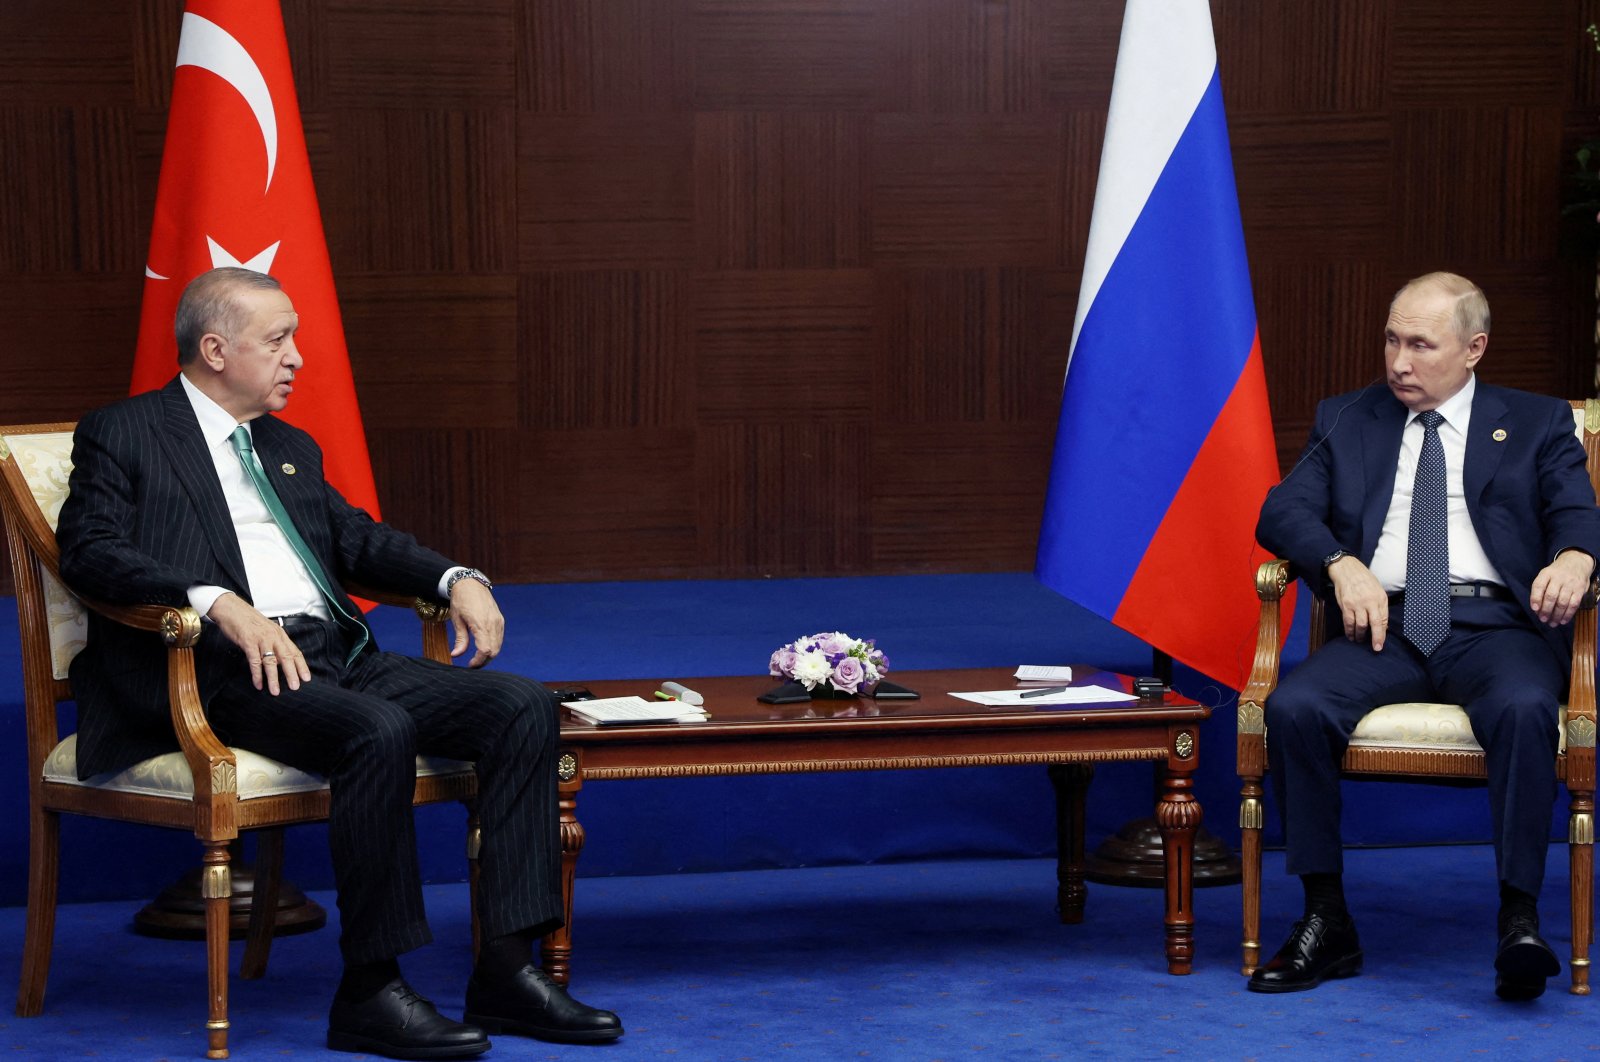 President Recep Tayyip Erdoğan and his Russian counterpart Vladimir Putin meet on the sidelines of the 6th summit of the Conference on Interaction and Confidence-building Measures in Asia (CICA), in Astana, Kazakhstan, Oct. 13, 2022. (Reuters File Photo)